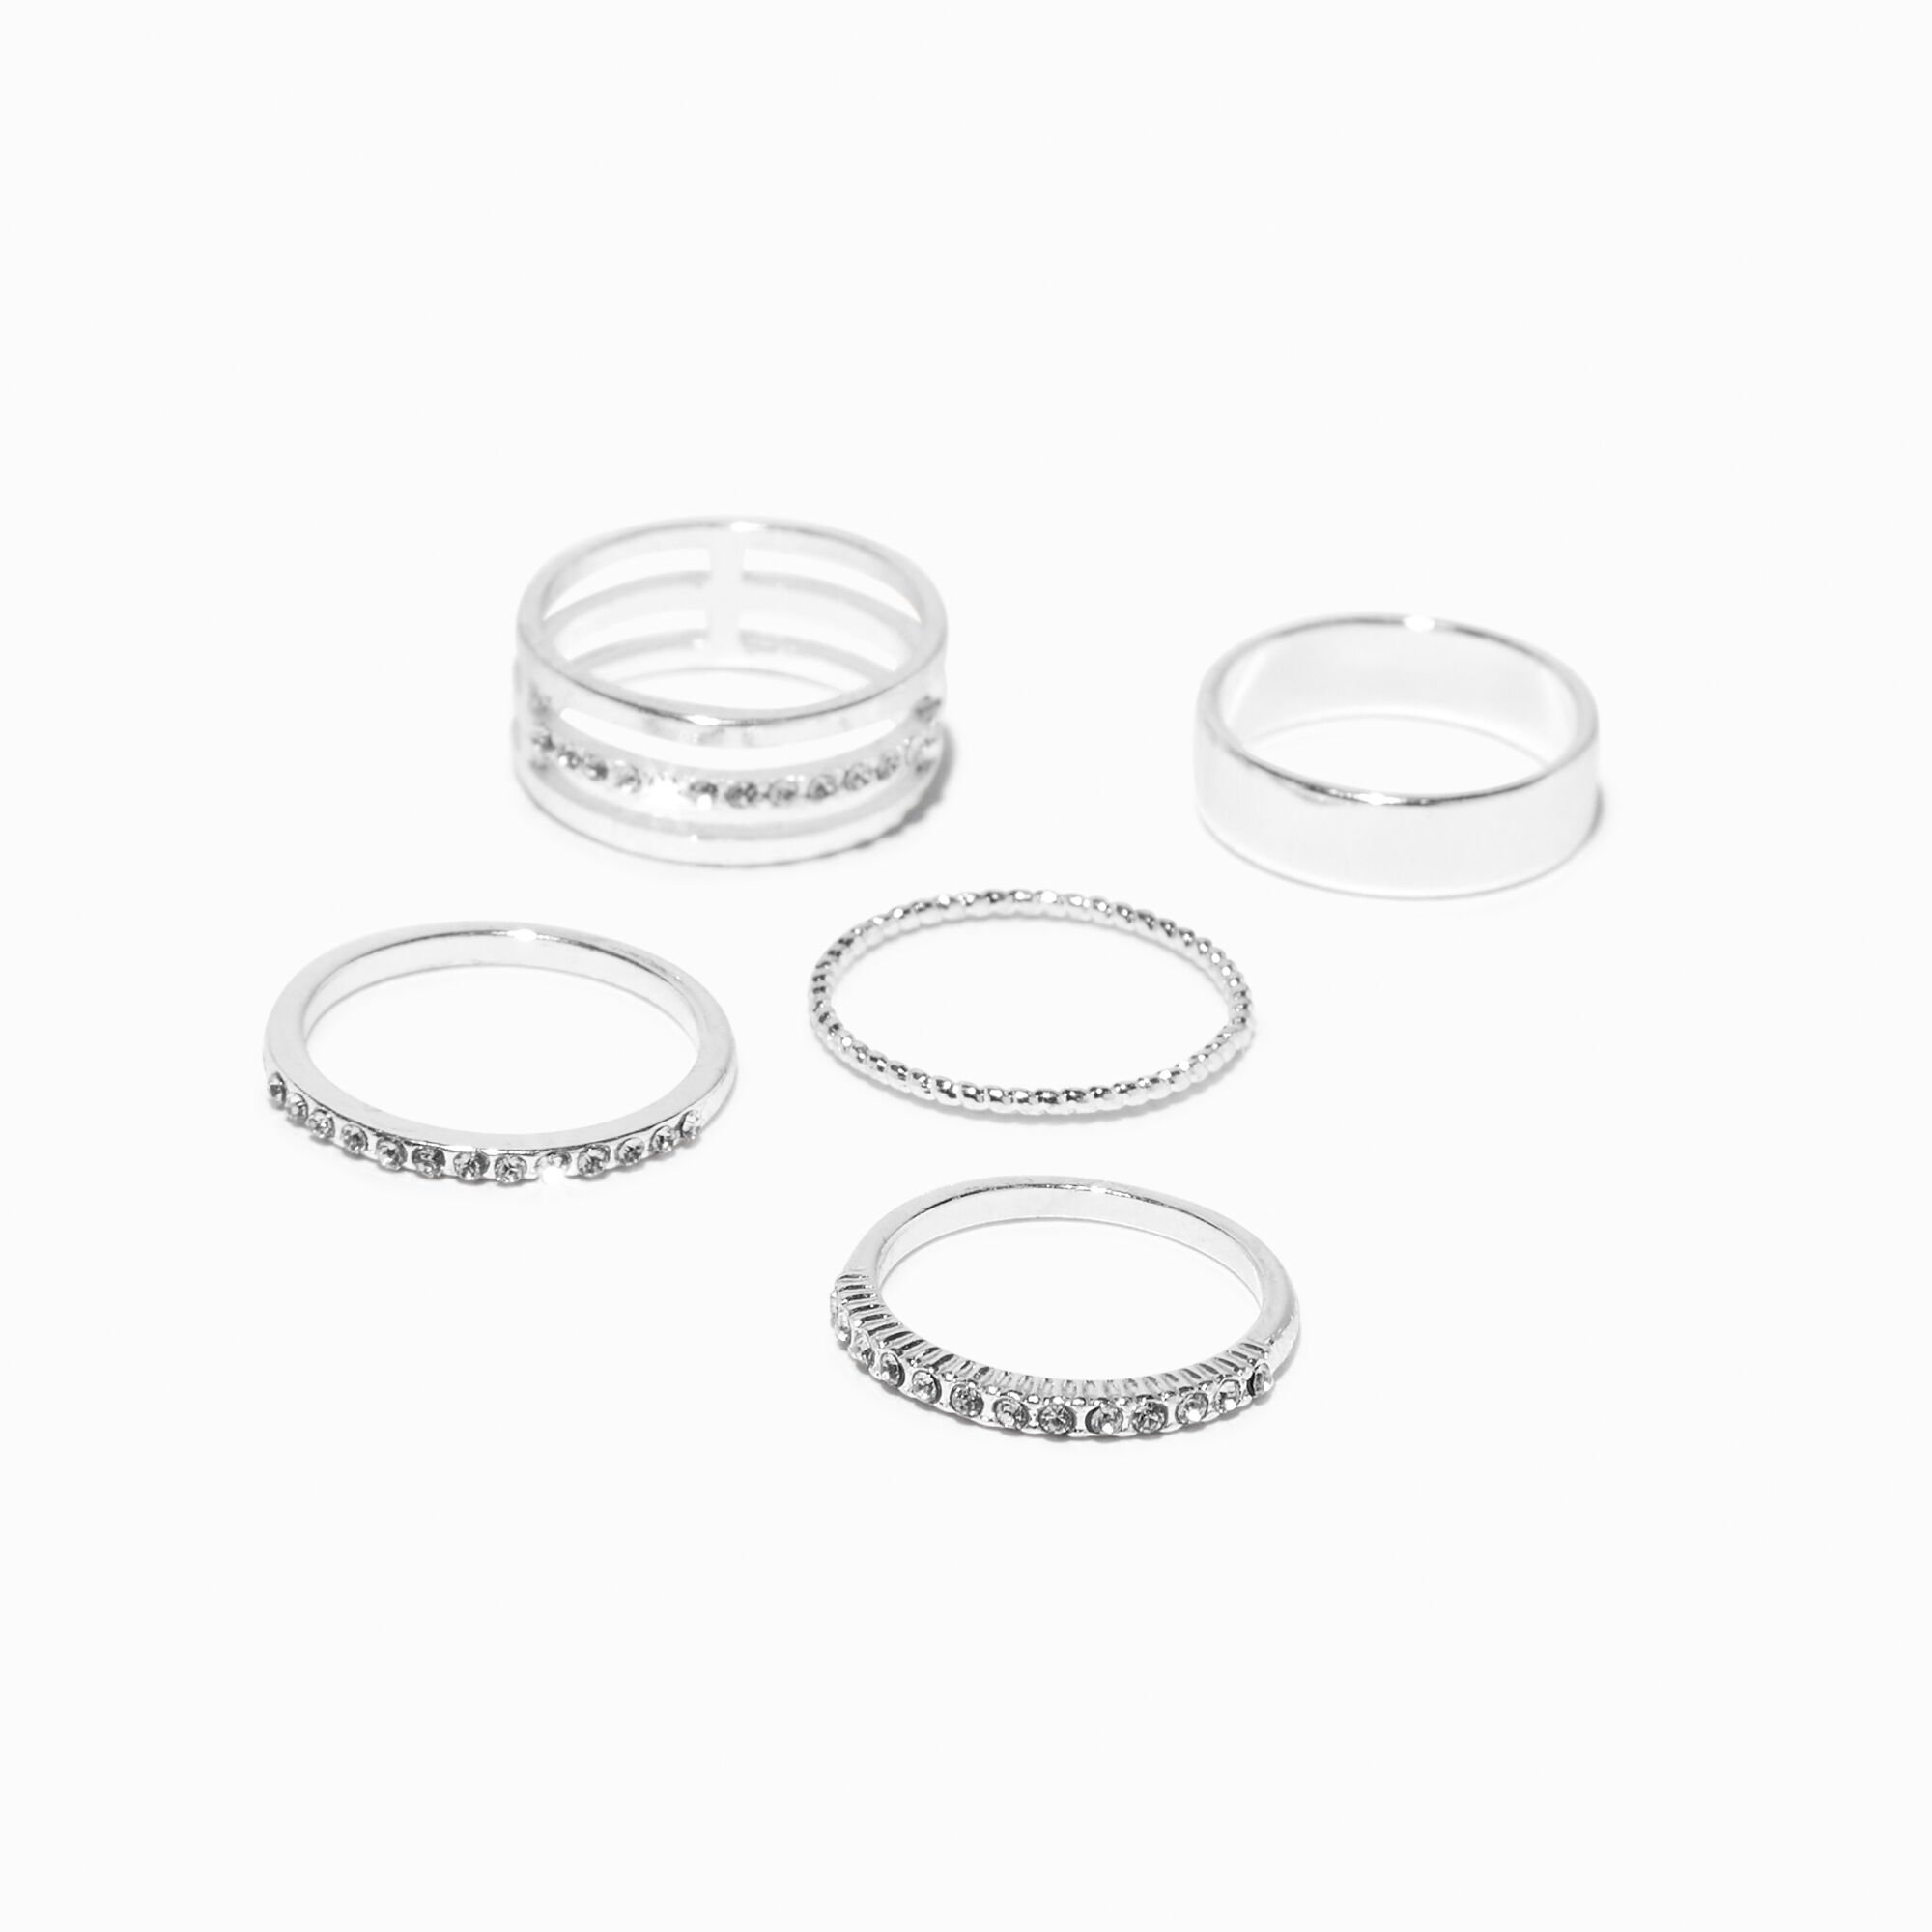 View Claires Studded Band Rings 5 Pack Silver information